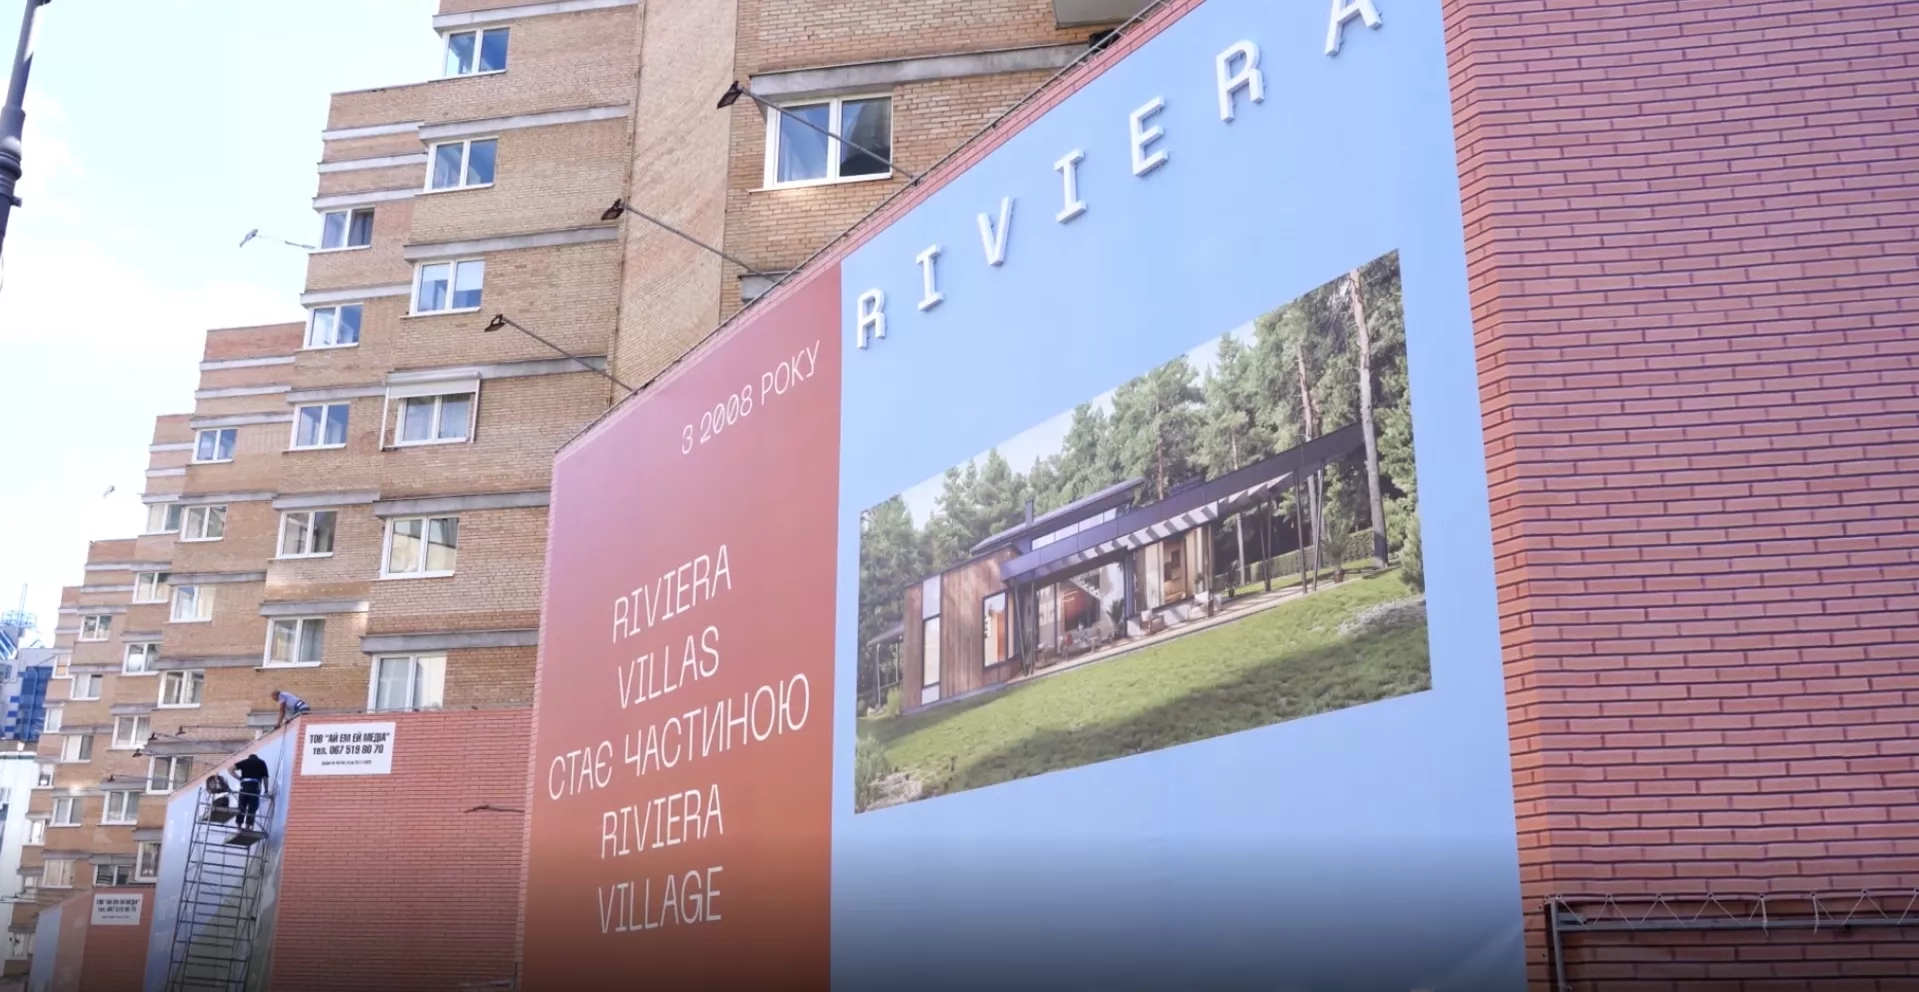 MASSIVE ADVERTISING PROJECT FOR RIVIERA VILLAGE